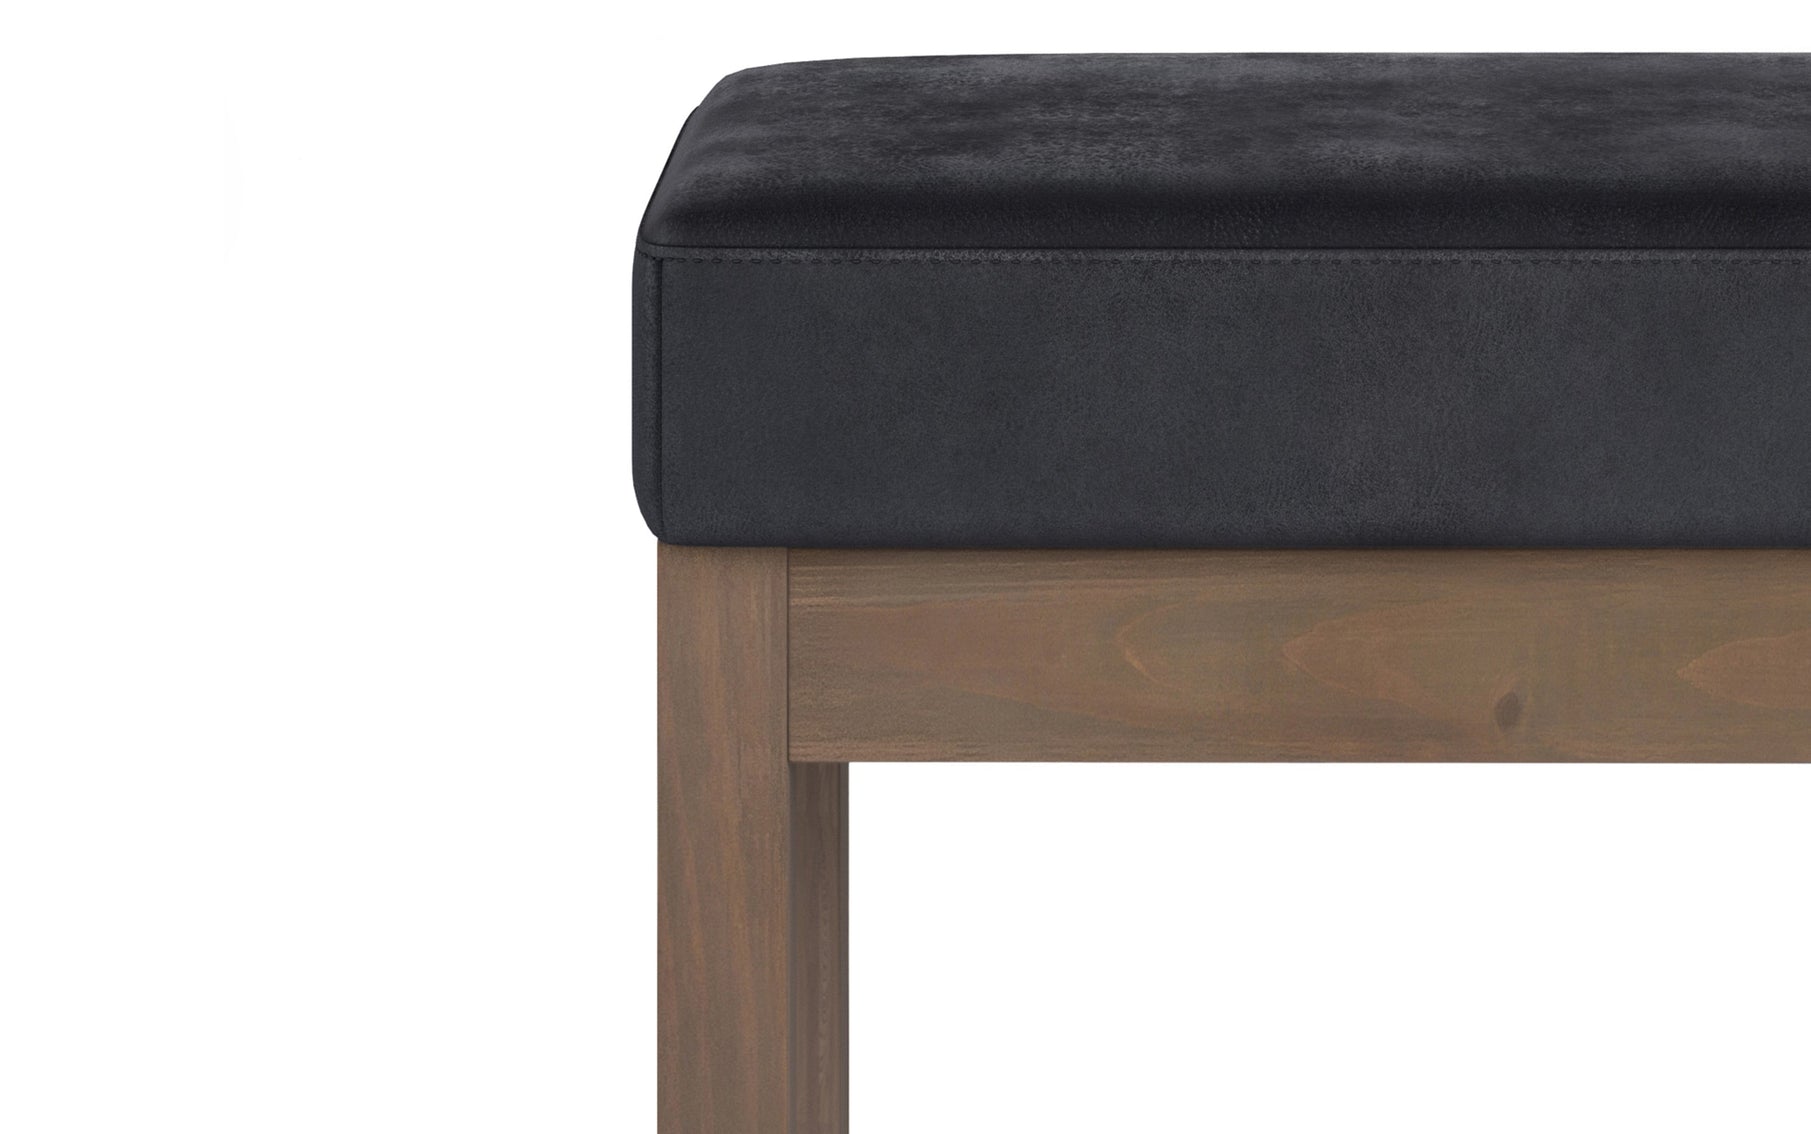 Distressed Black Distressed Vegan Leather | Milltown Footstool Small Ottoman Bench